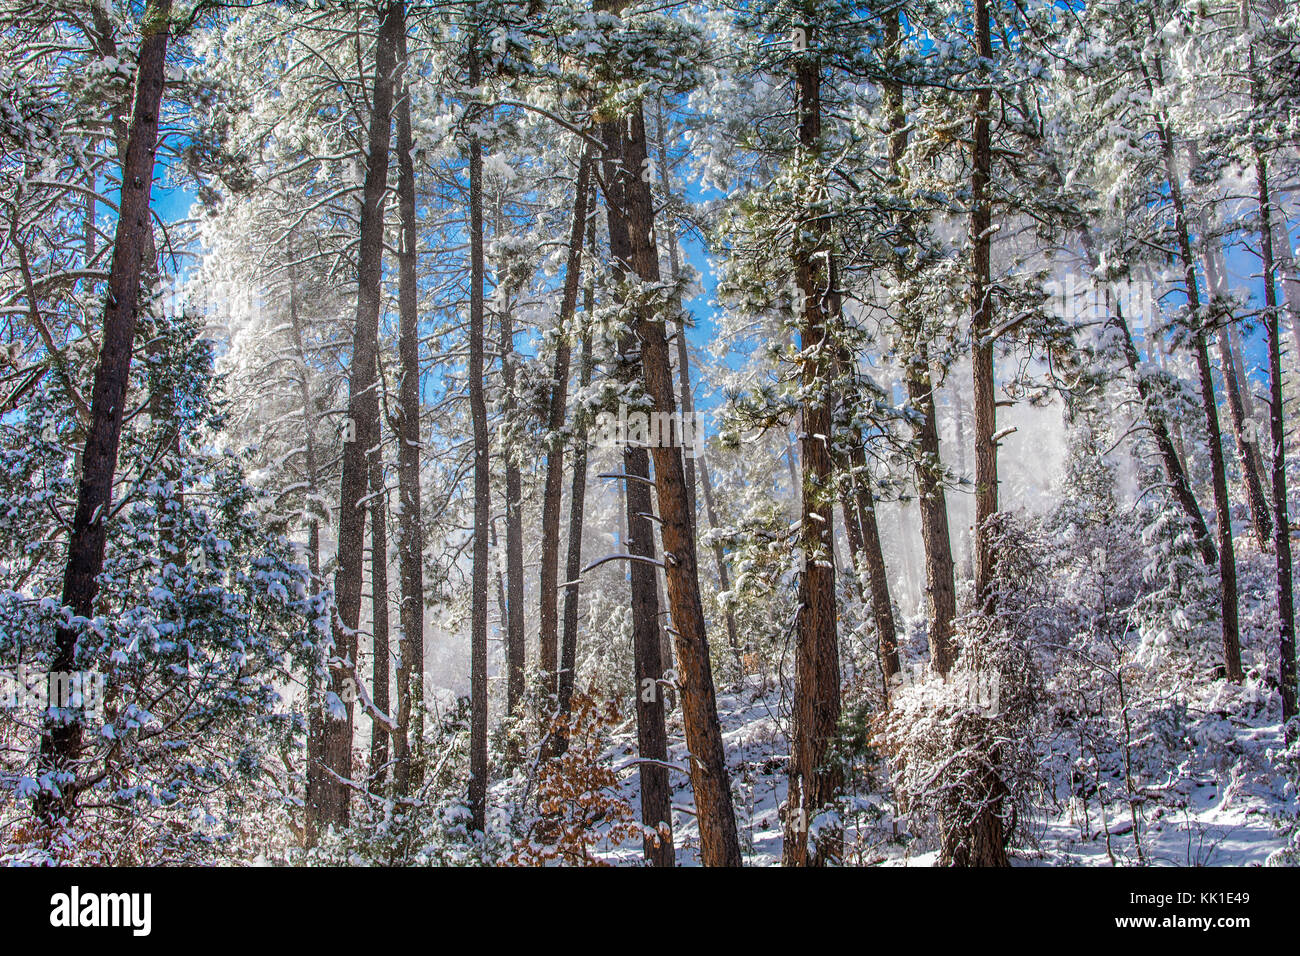 Snow shower on ponderosa pine trees, pinus ponderosa under a blue sky in Lincoln National Forest, New Mexico, USA. Stock Photo